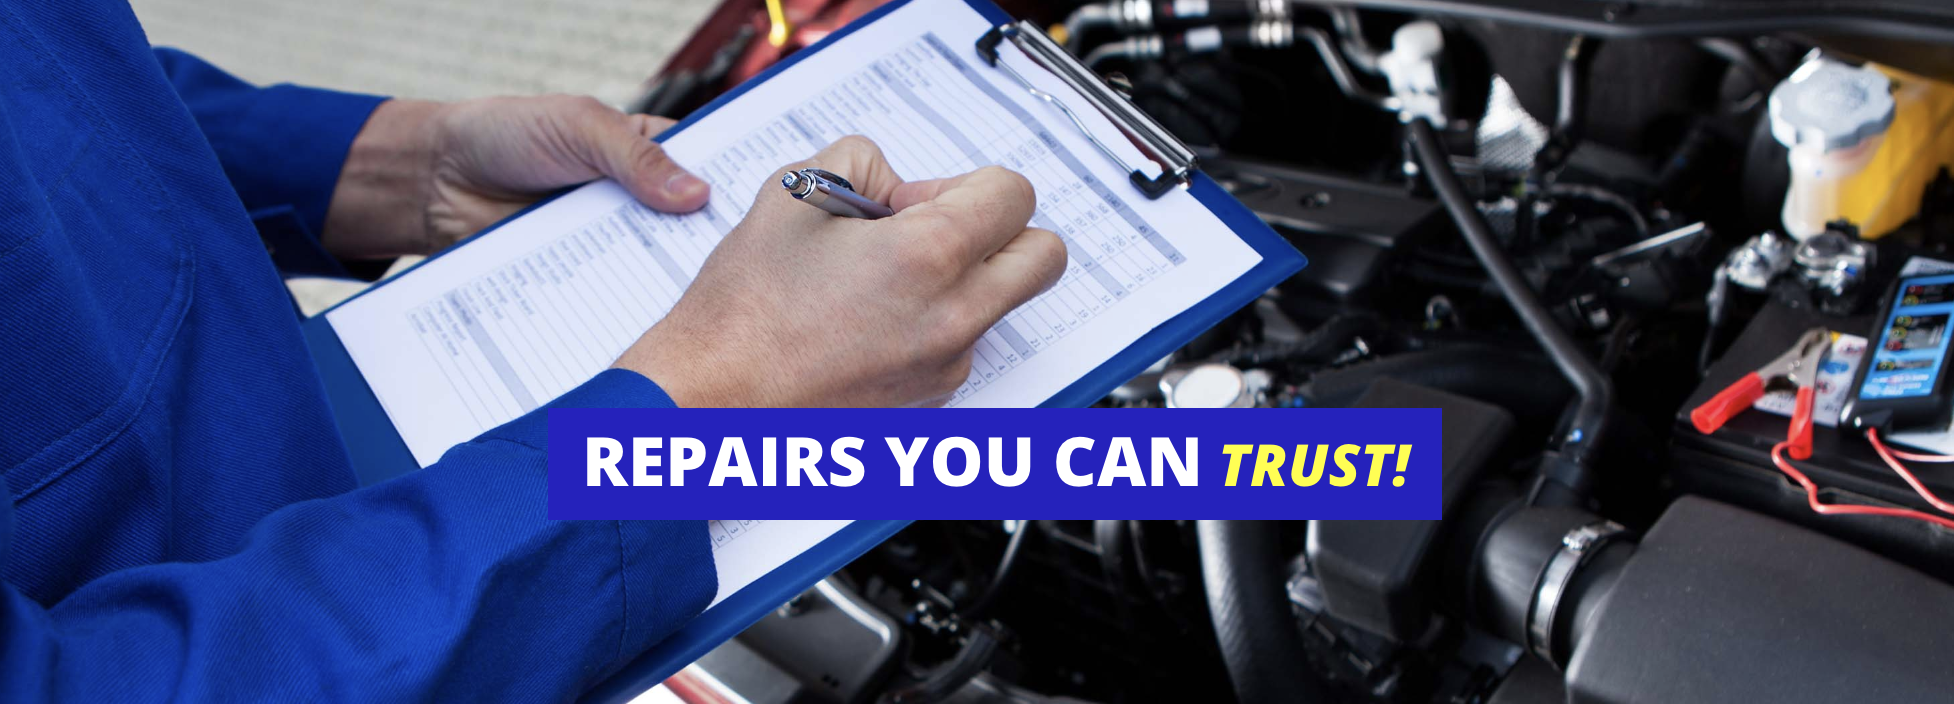 Archer's Auto Care, Inc. has repairs you can trust!!! Archer's Auto Care, Inc. Memphis (901)362-8863